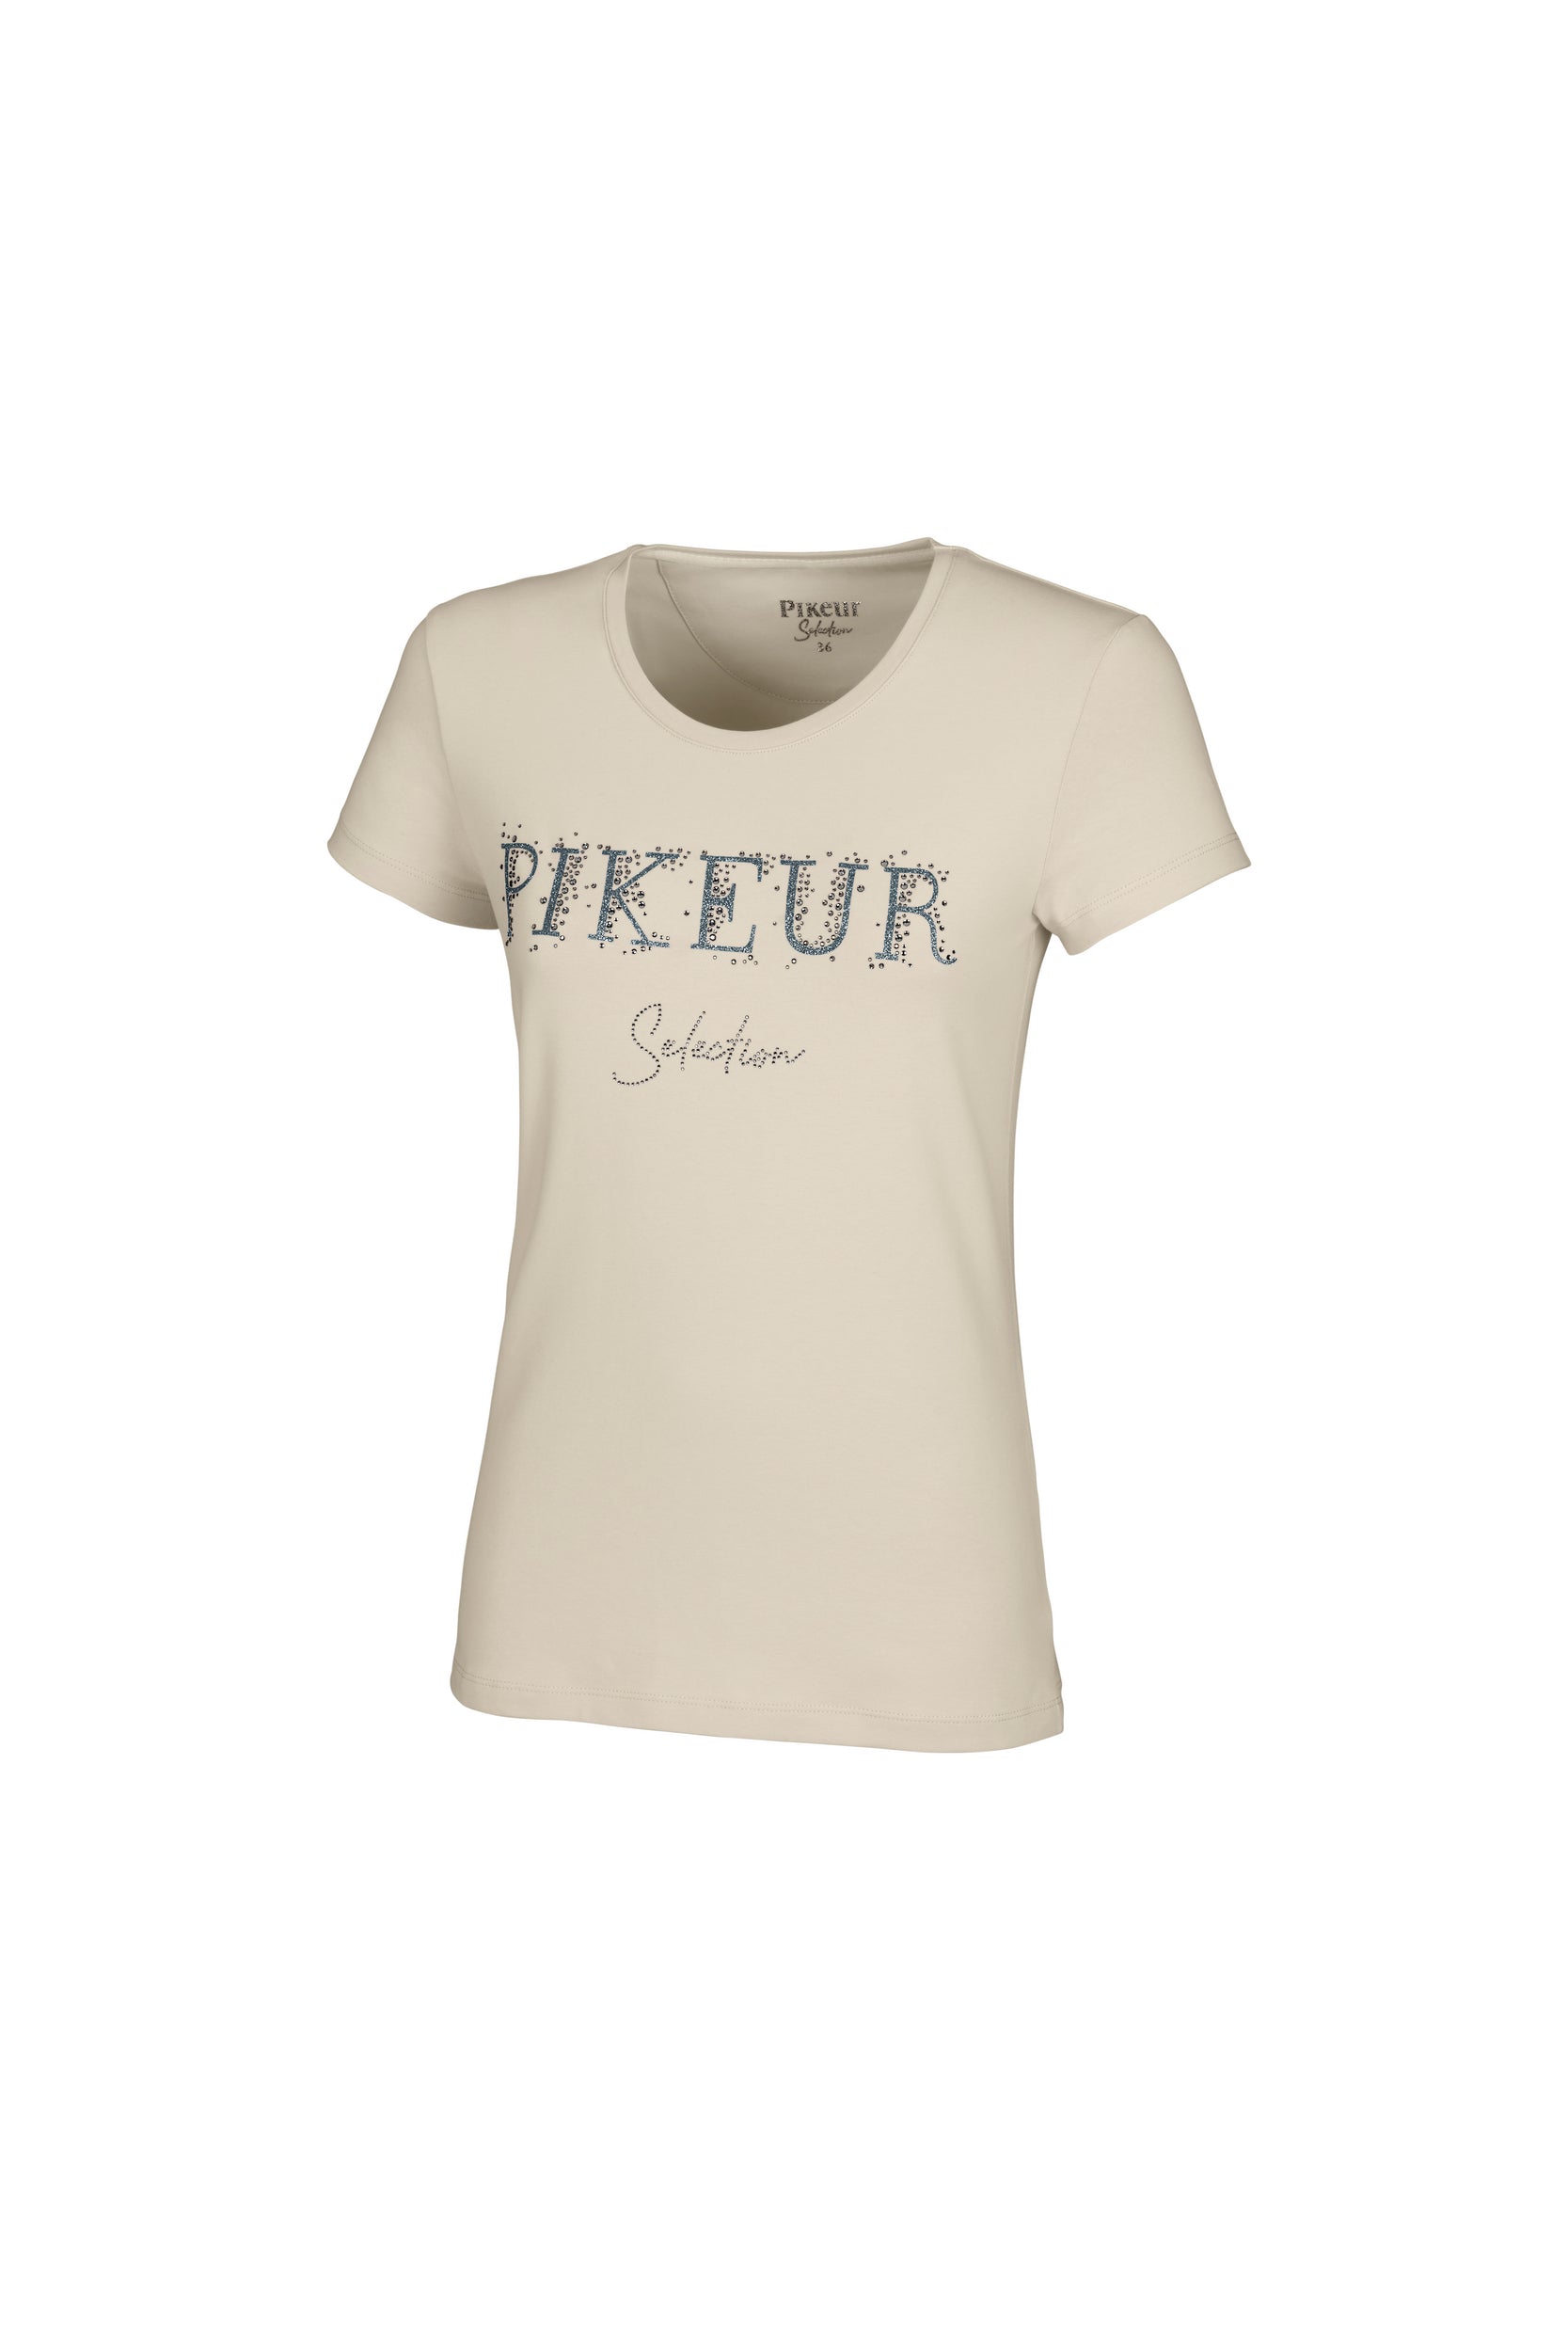 Pikeur Phily t-shirt Ivory- 1 uk 12 left